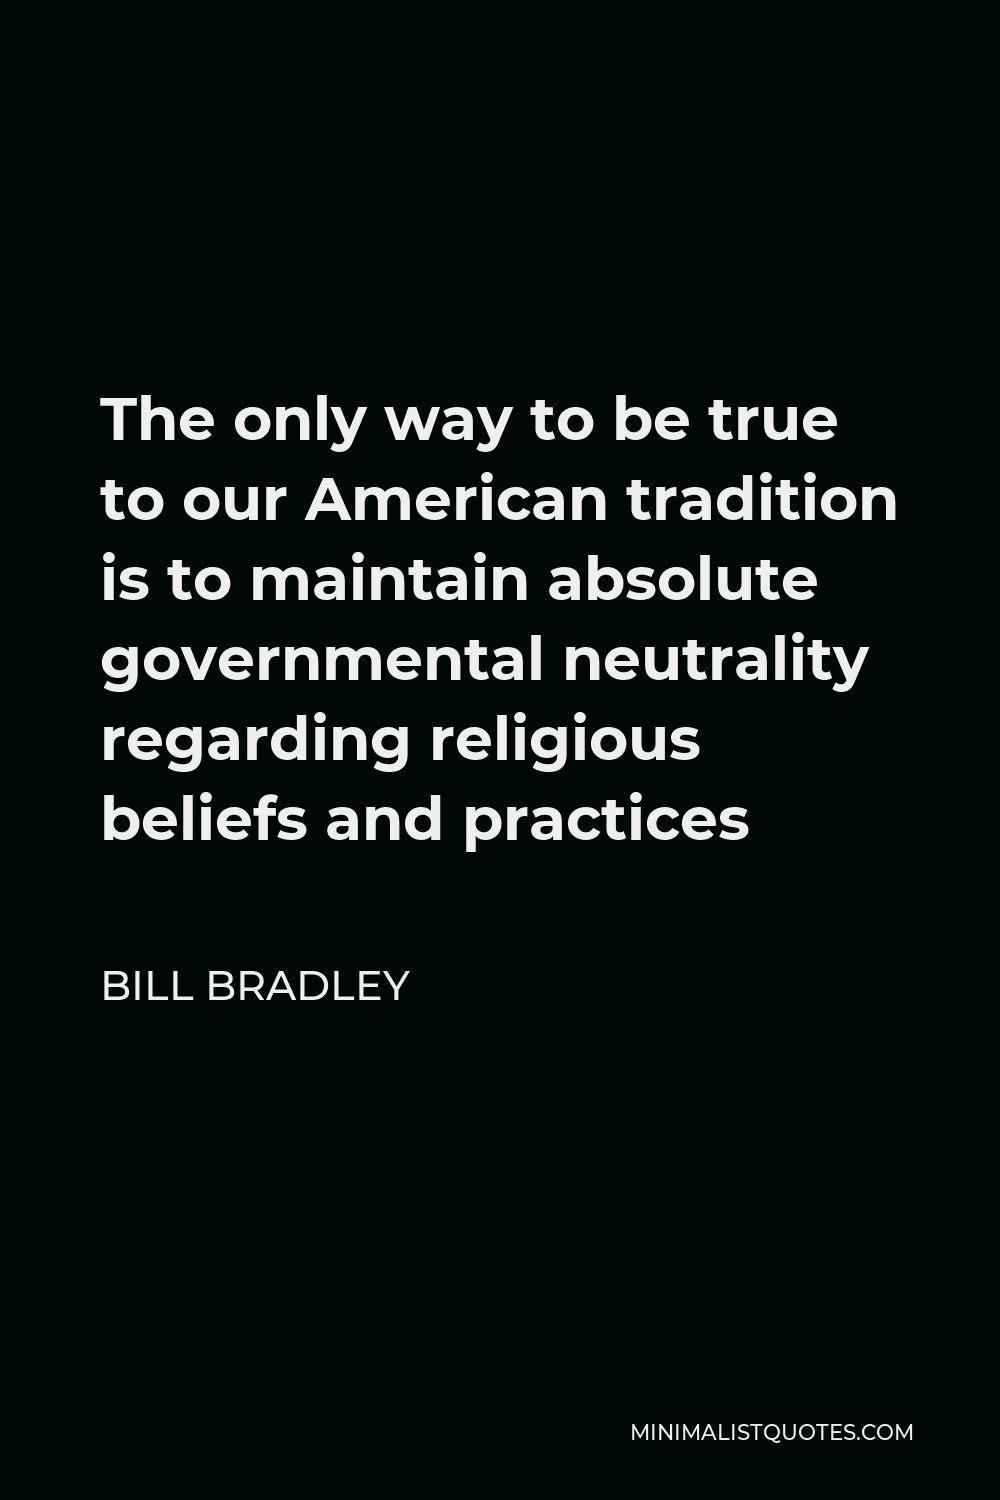 Bill Bradley Quote - The only way to be true to our American tradition is to maintain absolute governmental neutrality regarding religious beliefs and practices